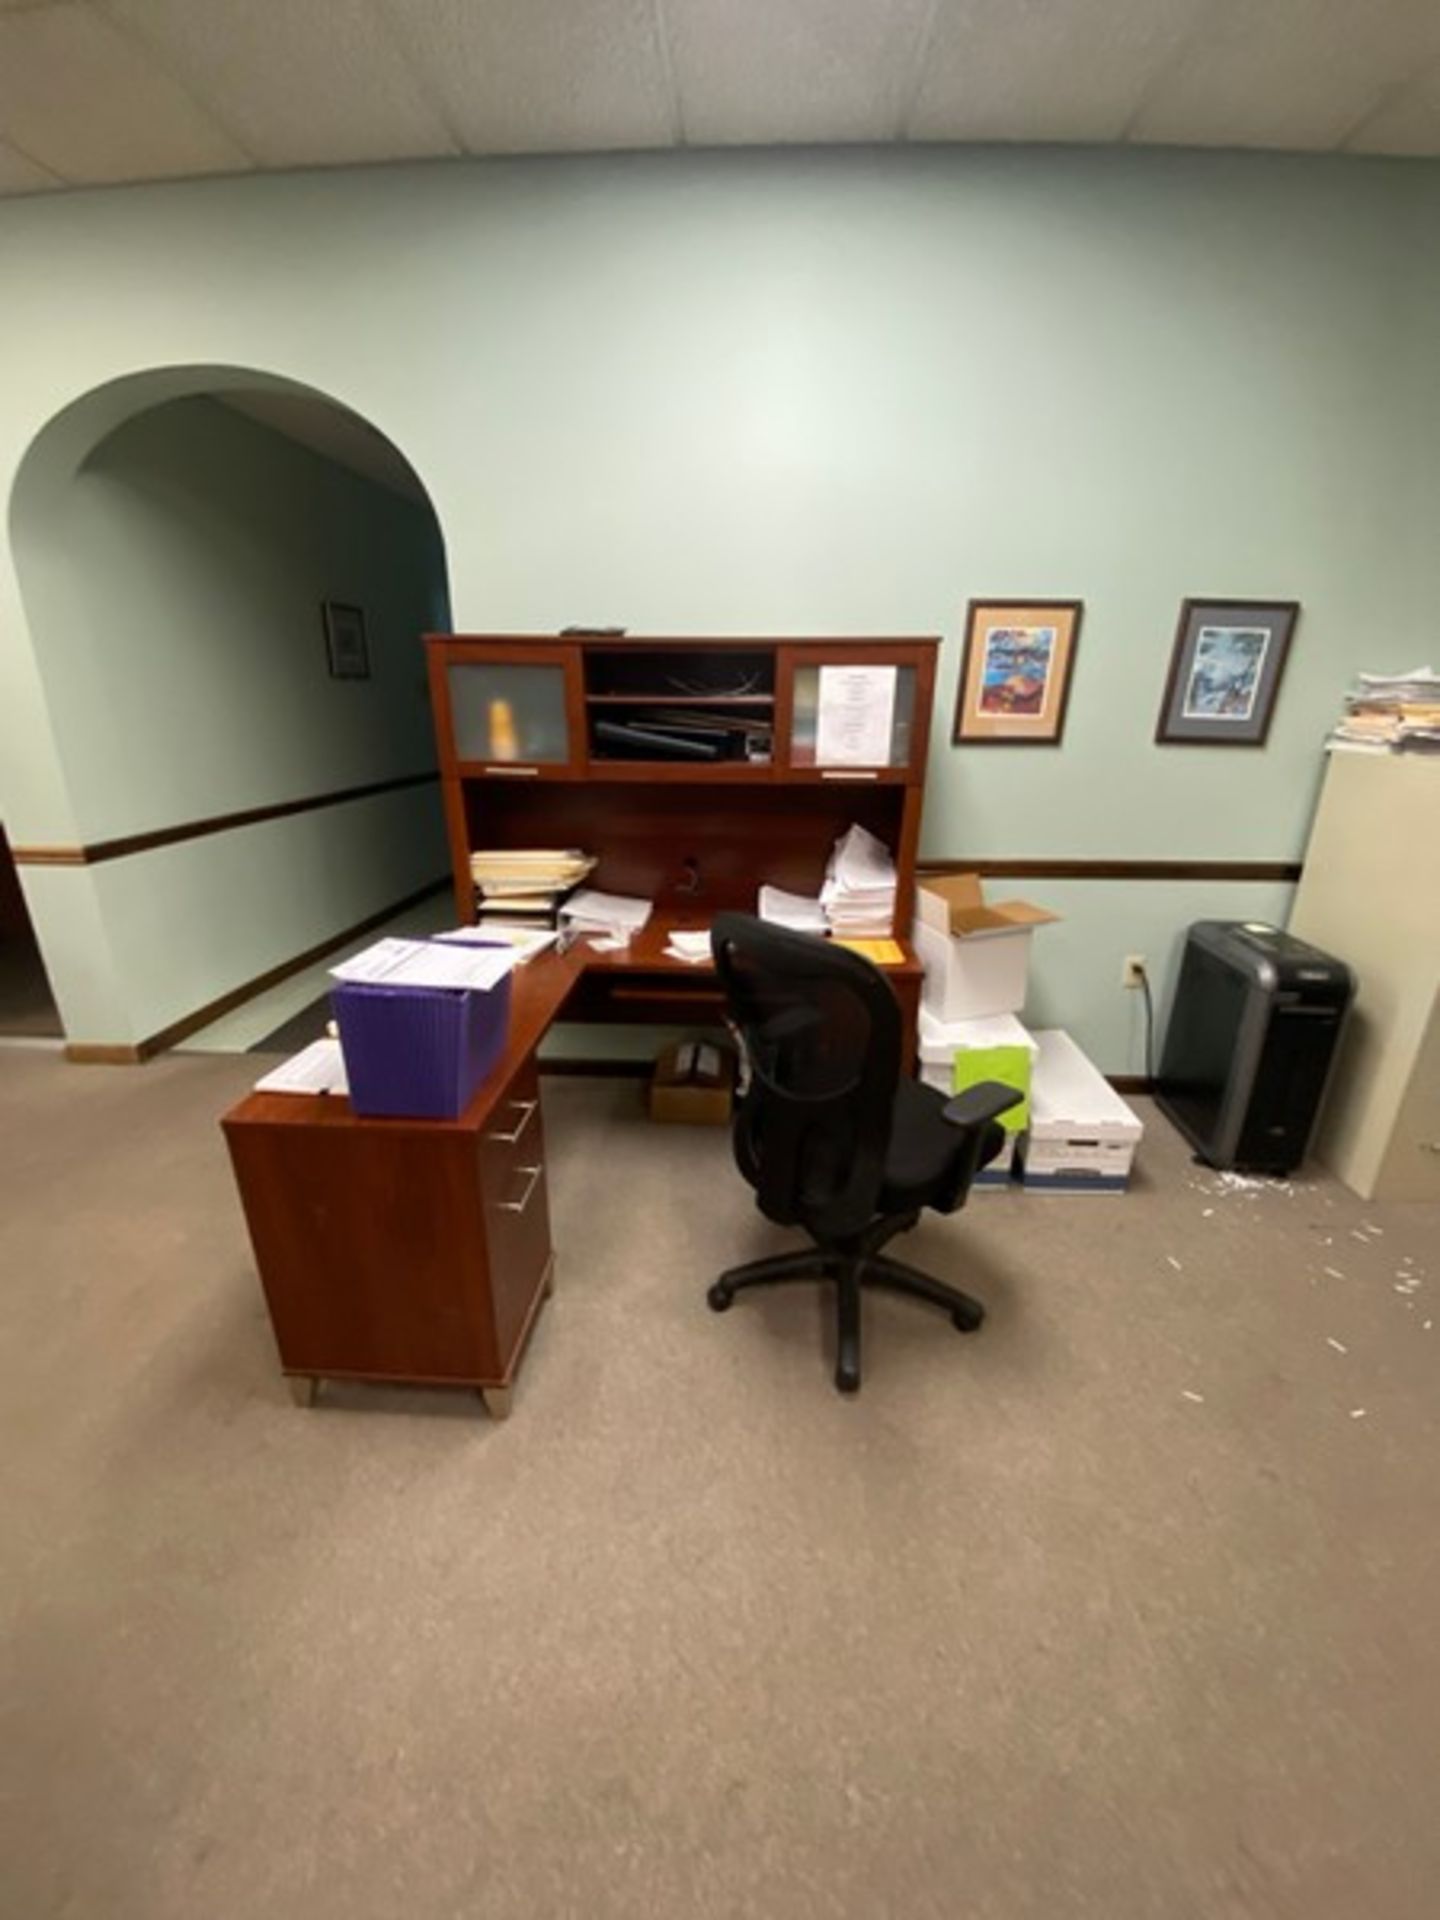 CONTENTS OF MIDDLE OFFICE AREA, INCLUDES FILING CABINETS, DESKS, CHAIRS, & OTHER PRESENT CONTENTS (